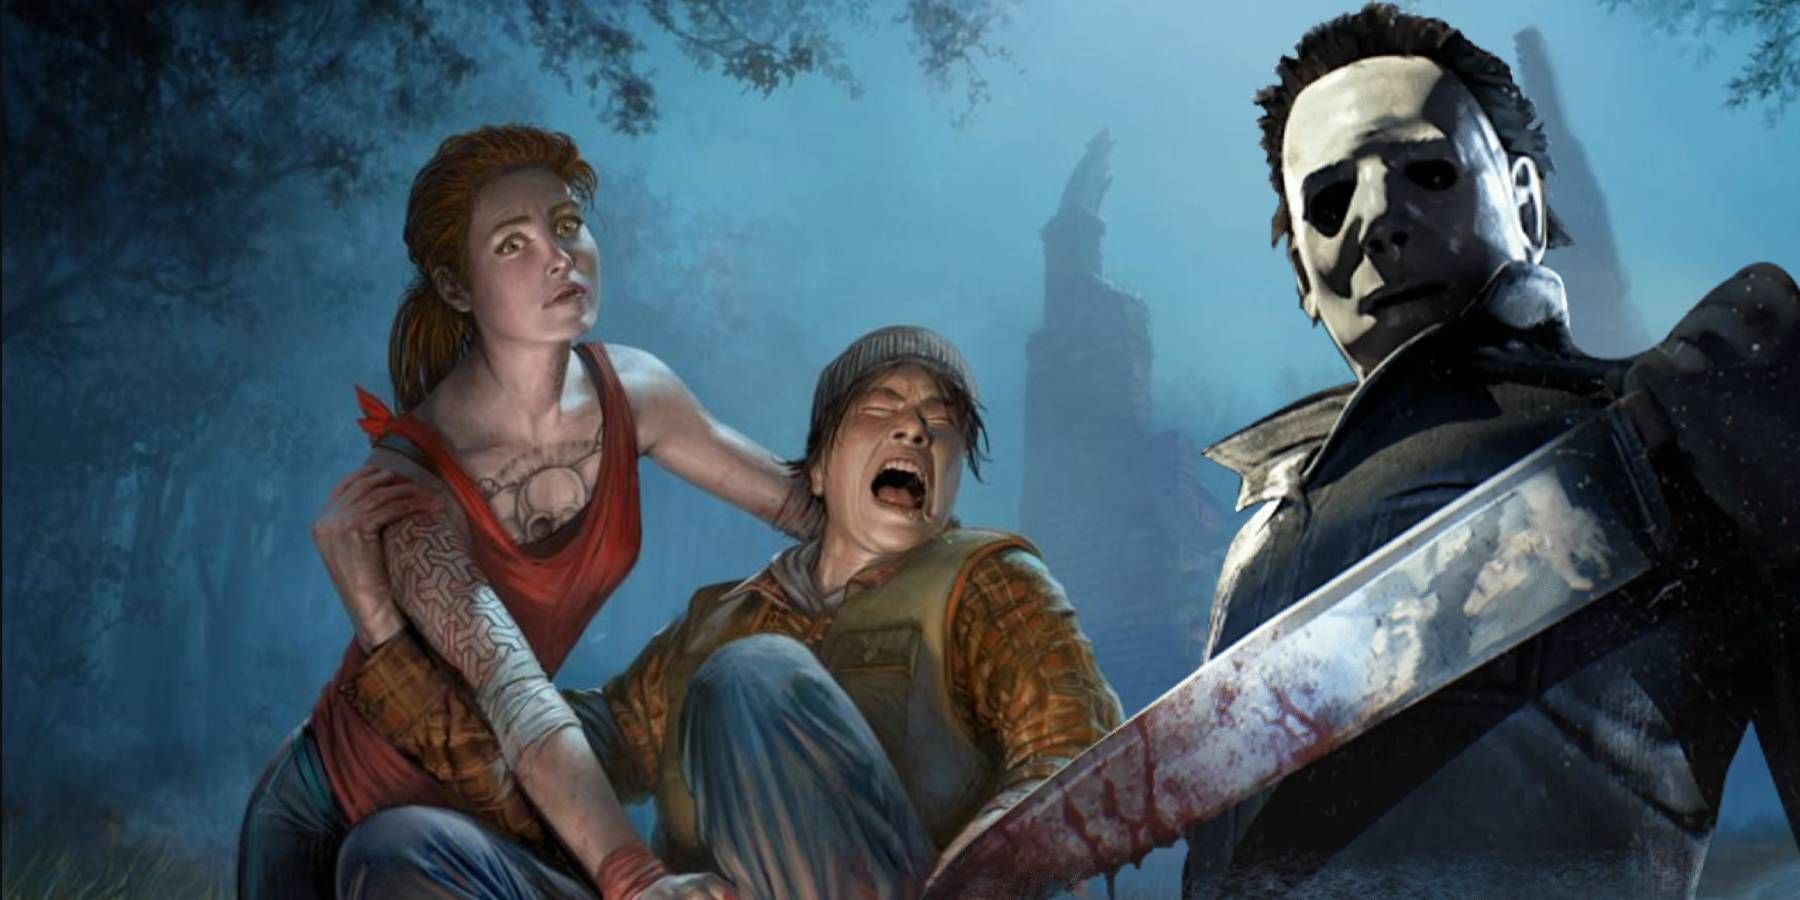 Michael Myers looming over Dead by Daylight promo art